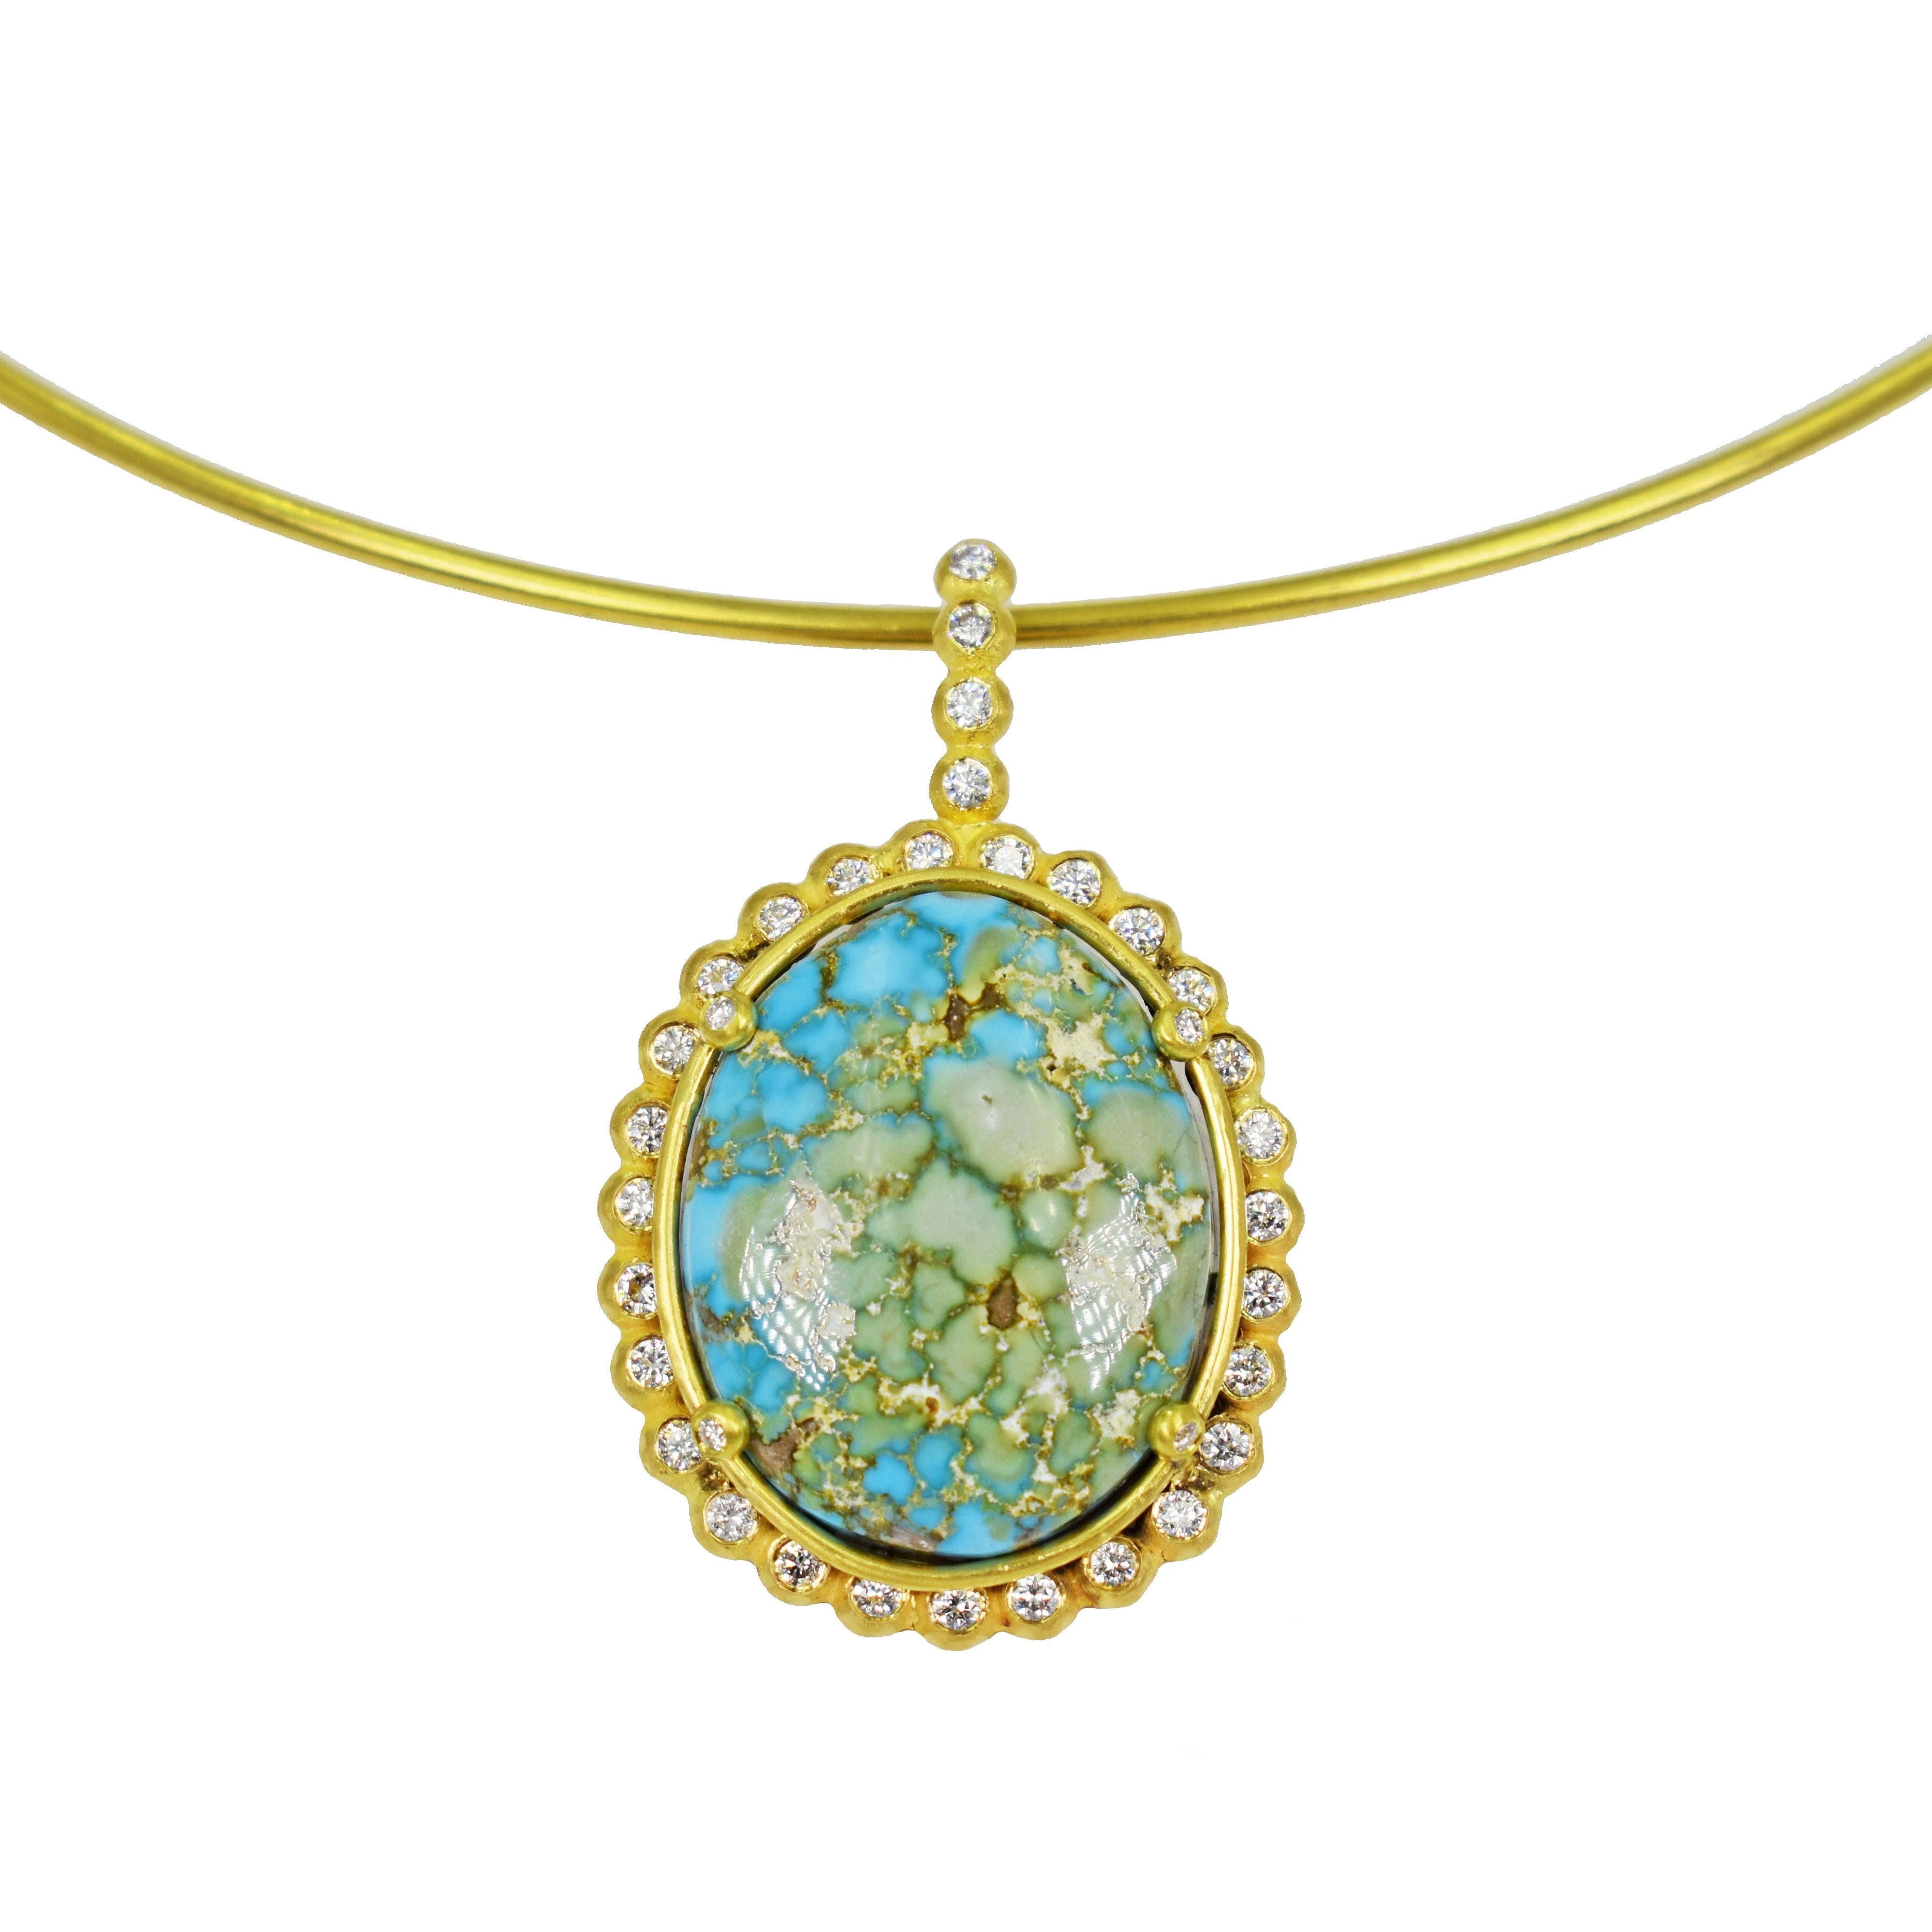 Vicki Orr Designs gem-grade Turquoise Mountain cabochon and Diamond halo 22k yellow gold pendant on a 22k wire collar necklace. Neck wire is 15 inches in length. Pendant, including bail, is 1.57 inches in length. Gorgeous, one-of-a-kind pendant